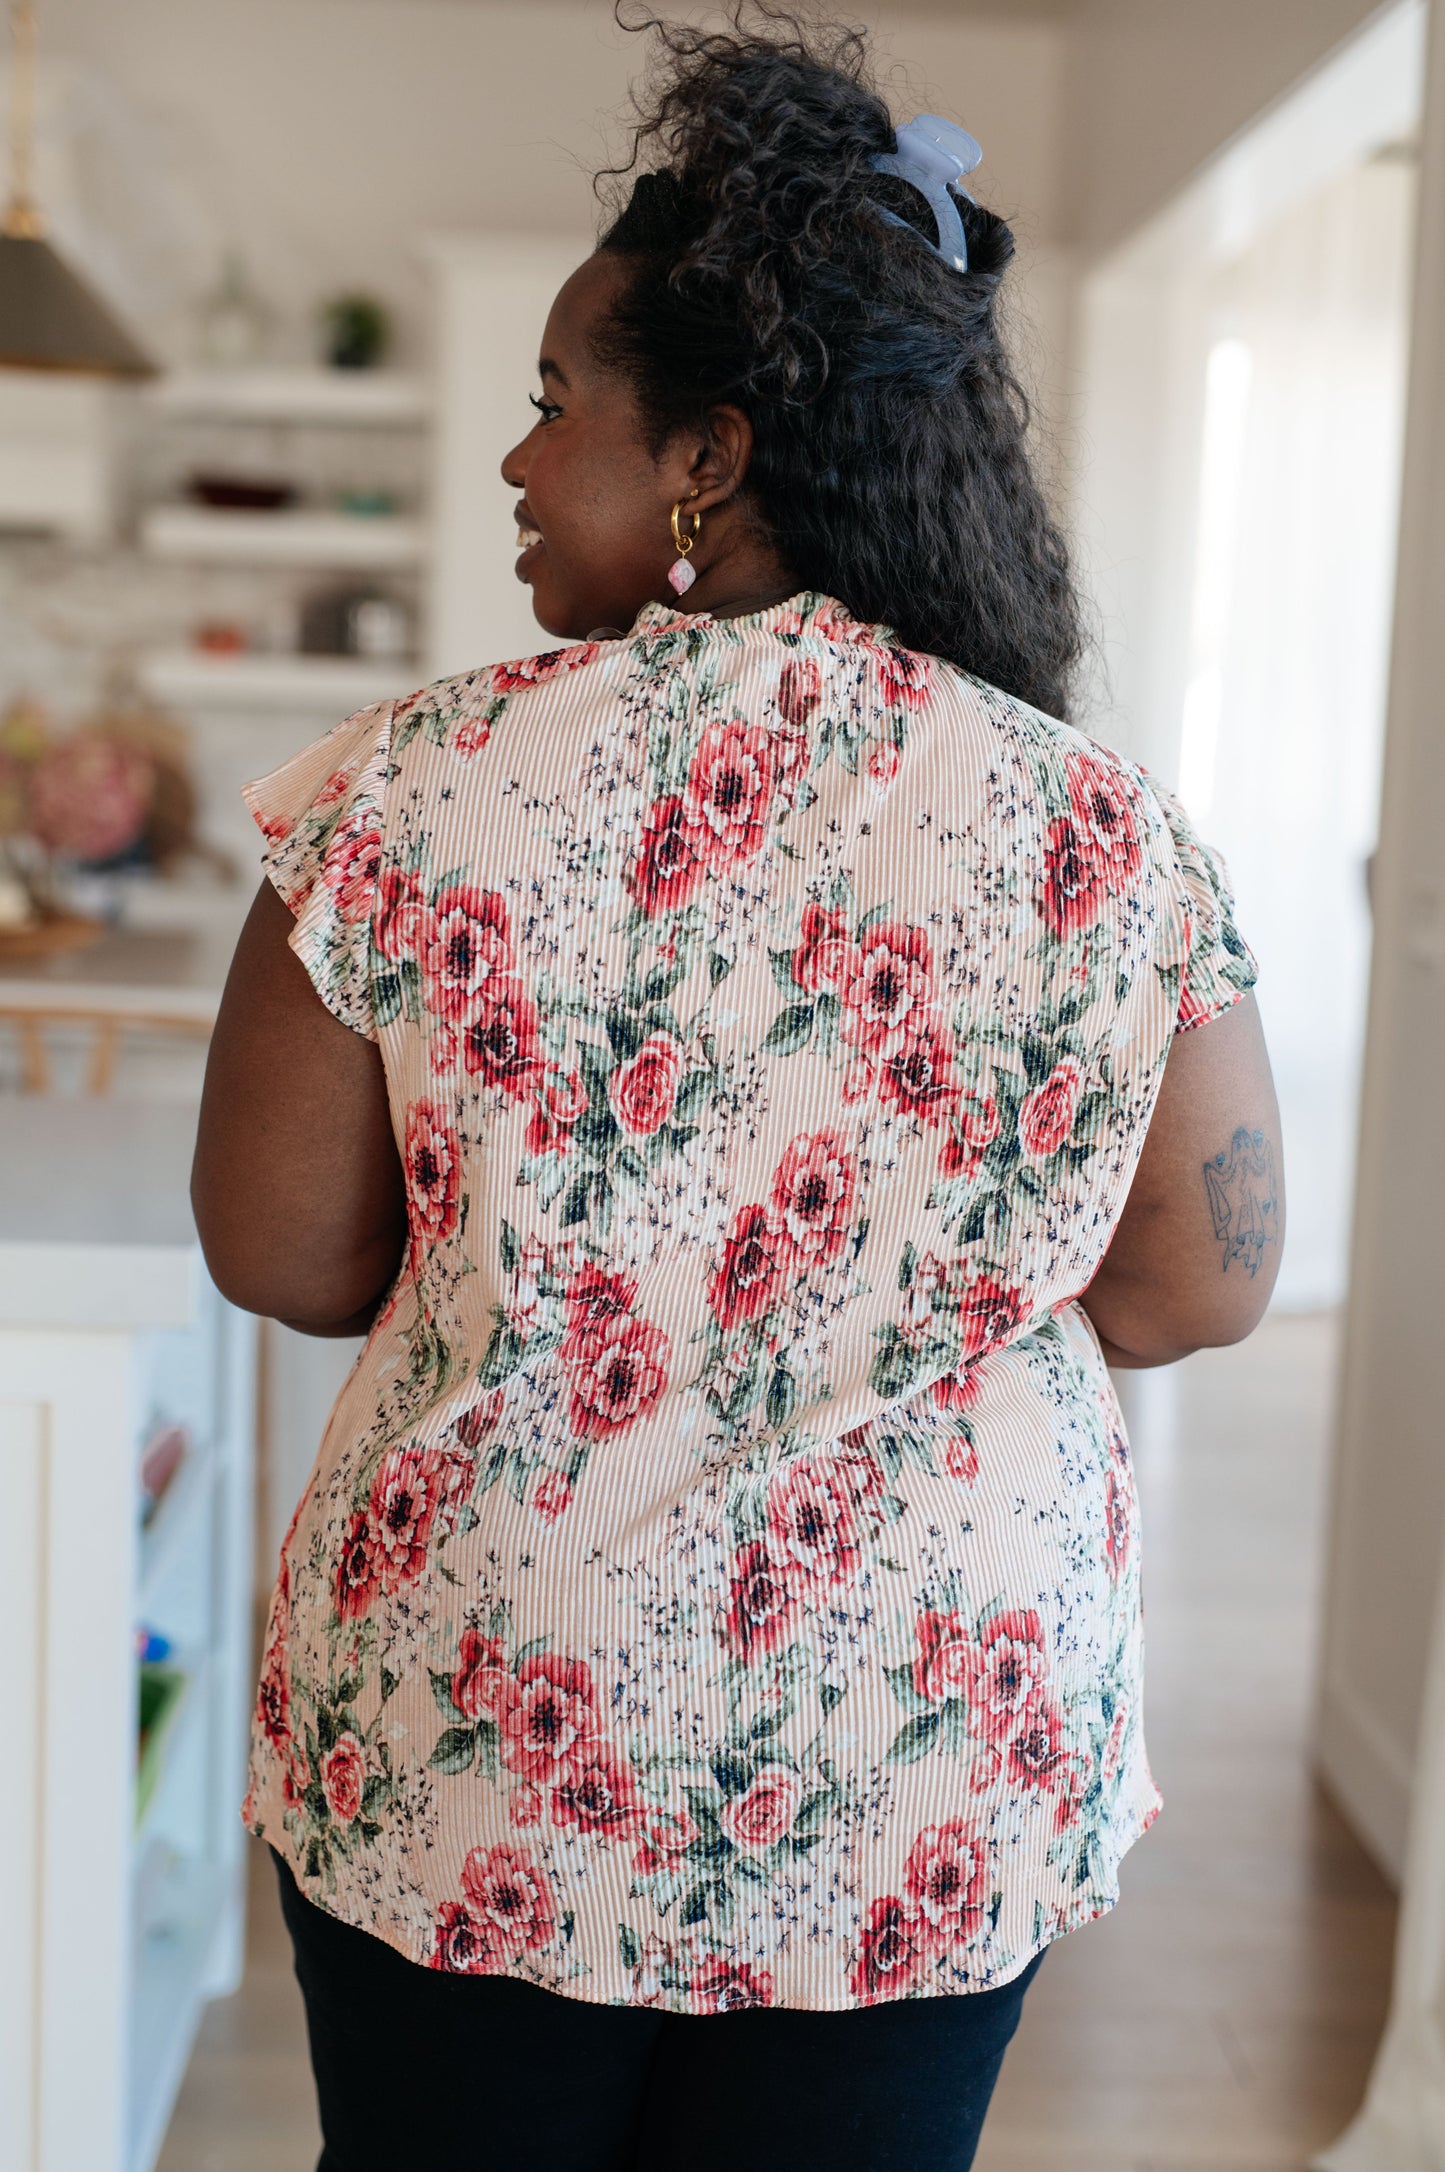 Making Me Blush Floral Top - Three Bears Boutique